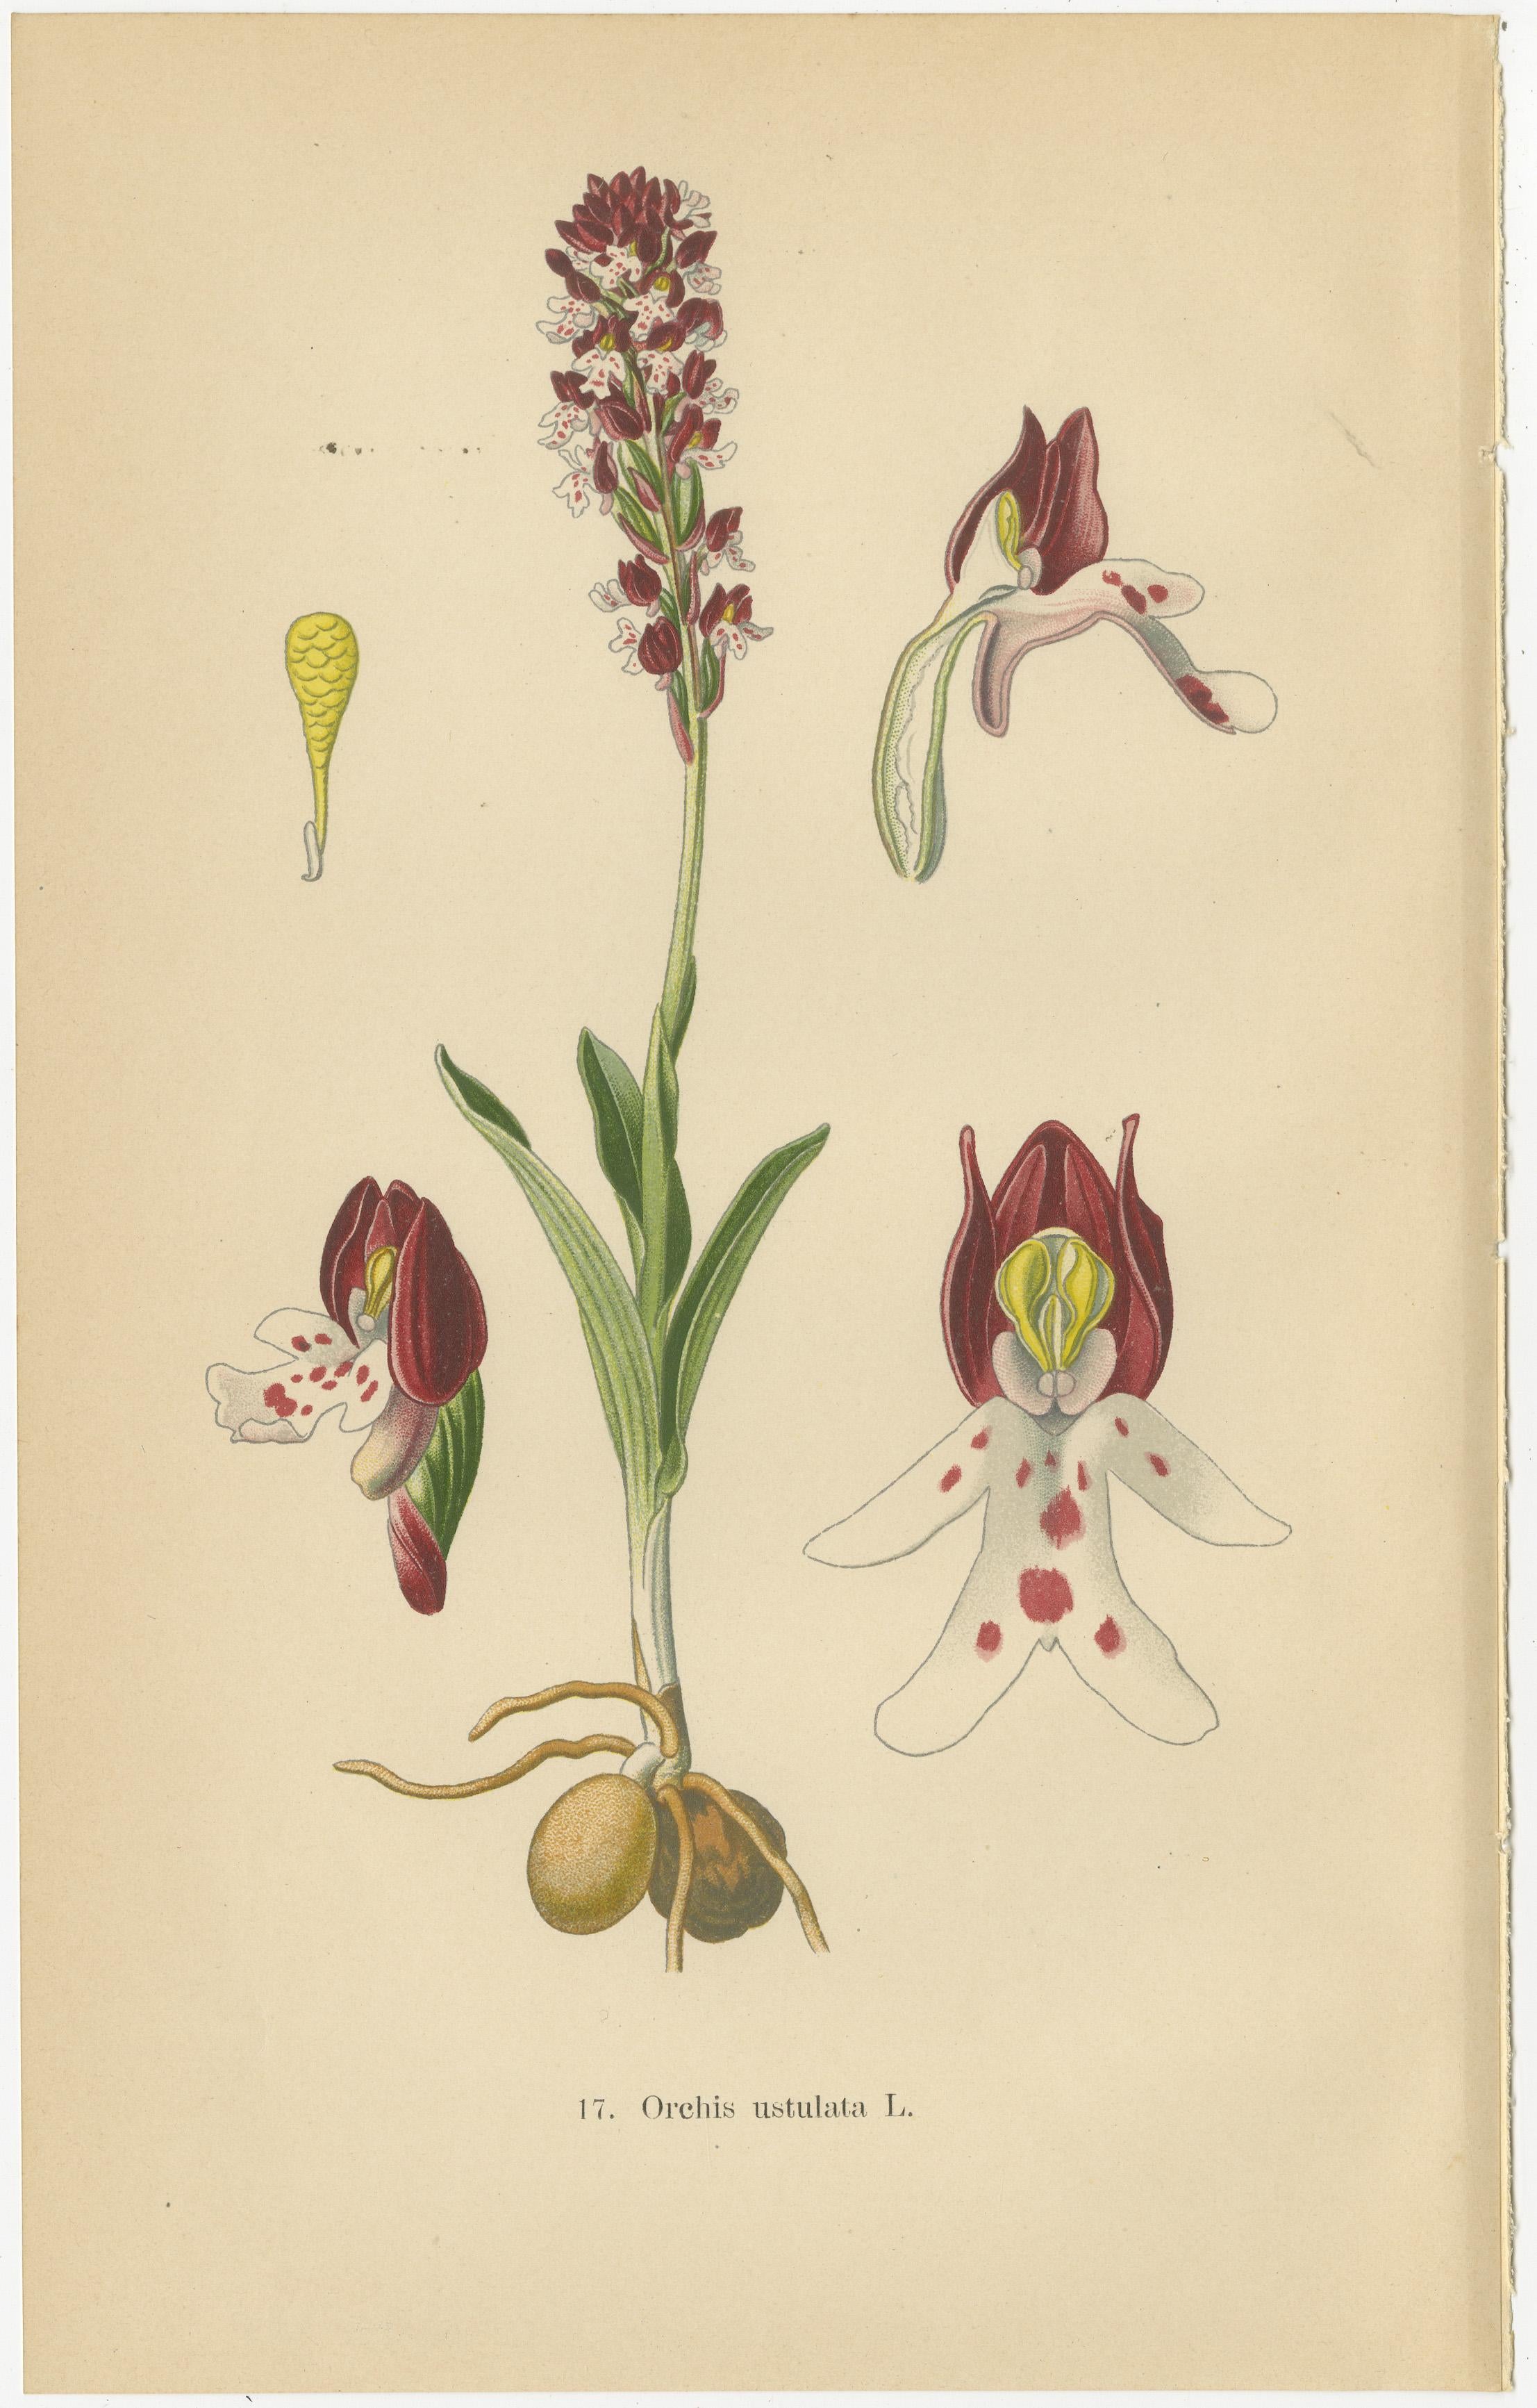 Ephemeral Elegance: Orchids of 1904 in Müller's Illustrations

Description: This collage presents a trio of exquisite botanical illustrations from Walter Müller's 1904 book, a comprehensive depiction of orchid species indigenous to Germany and